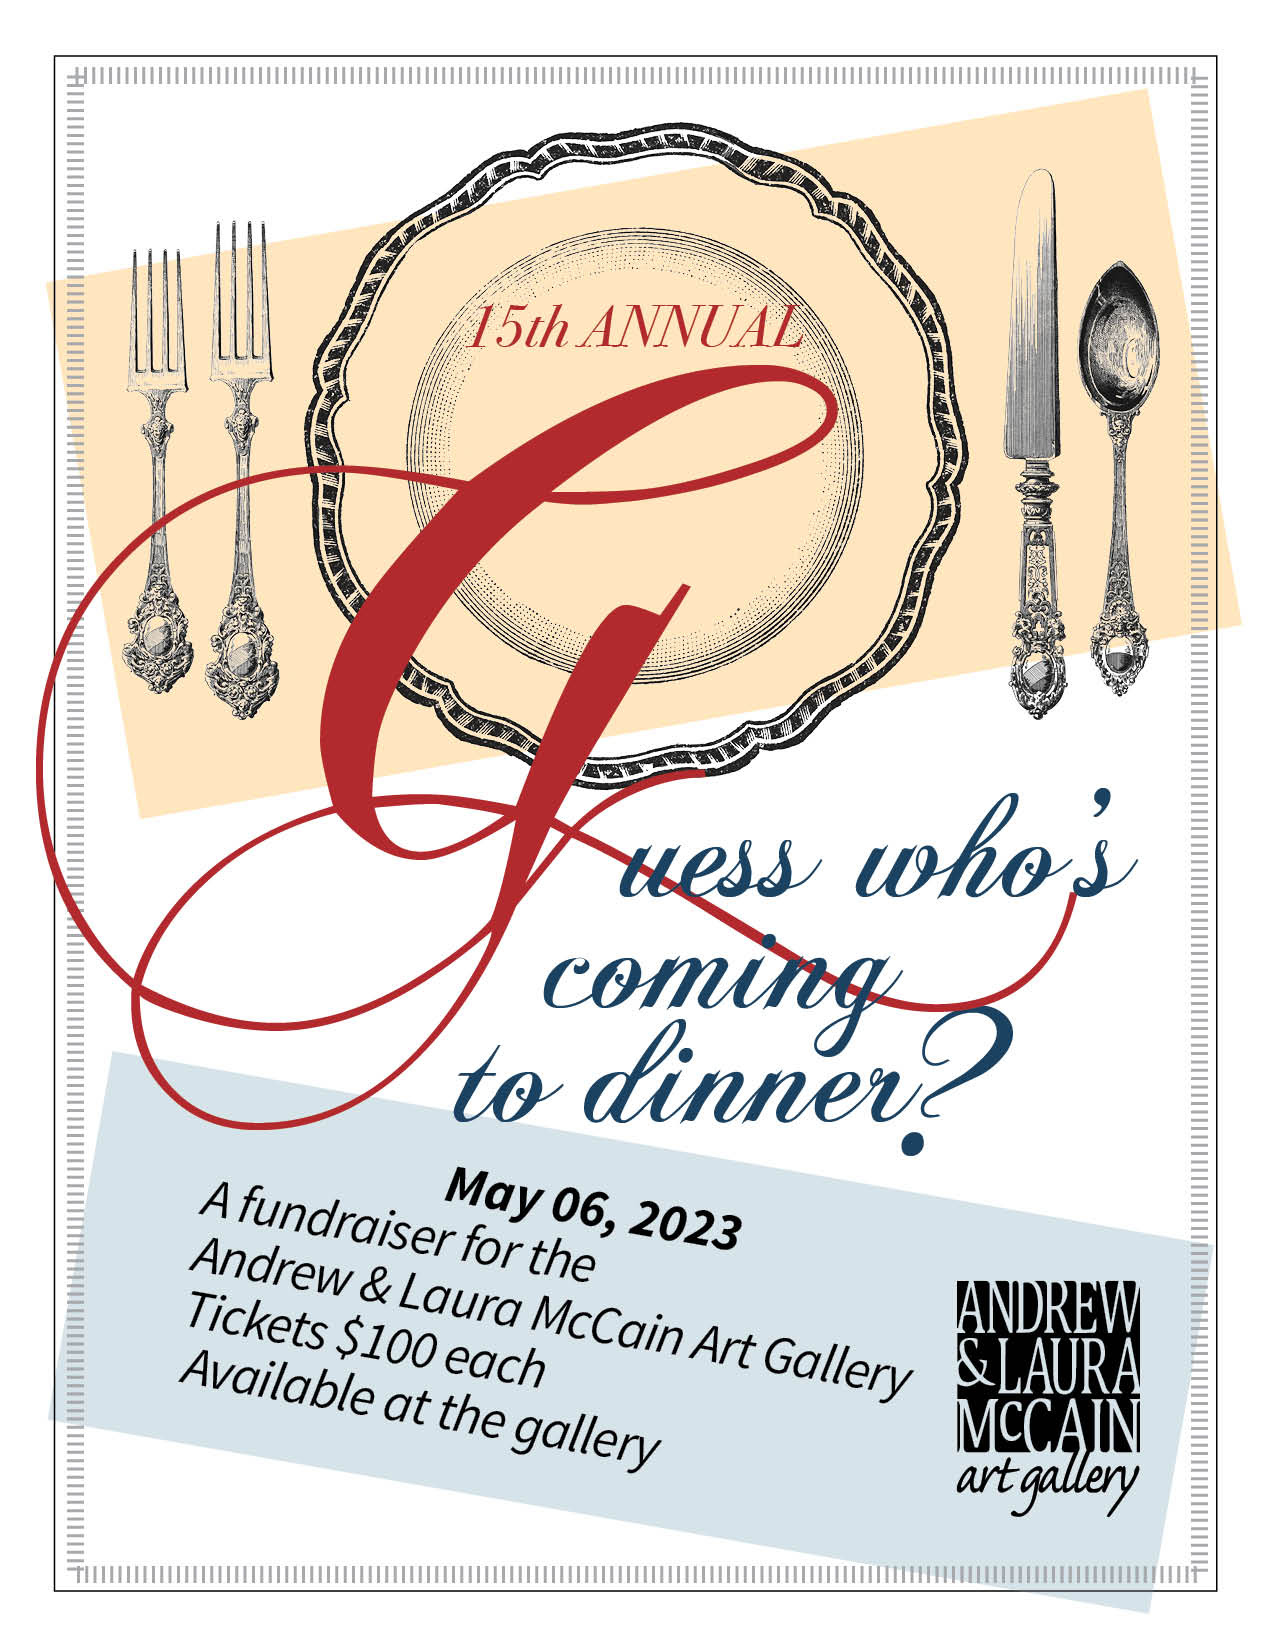 15th annual Guess Who's Coming to Dinner. May 6, 2023. A fundraiser for the Andrew and Laura McCain Art Gallery. Tickets $100 each, available at the gallery.